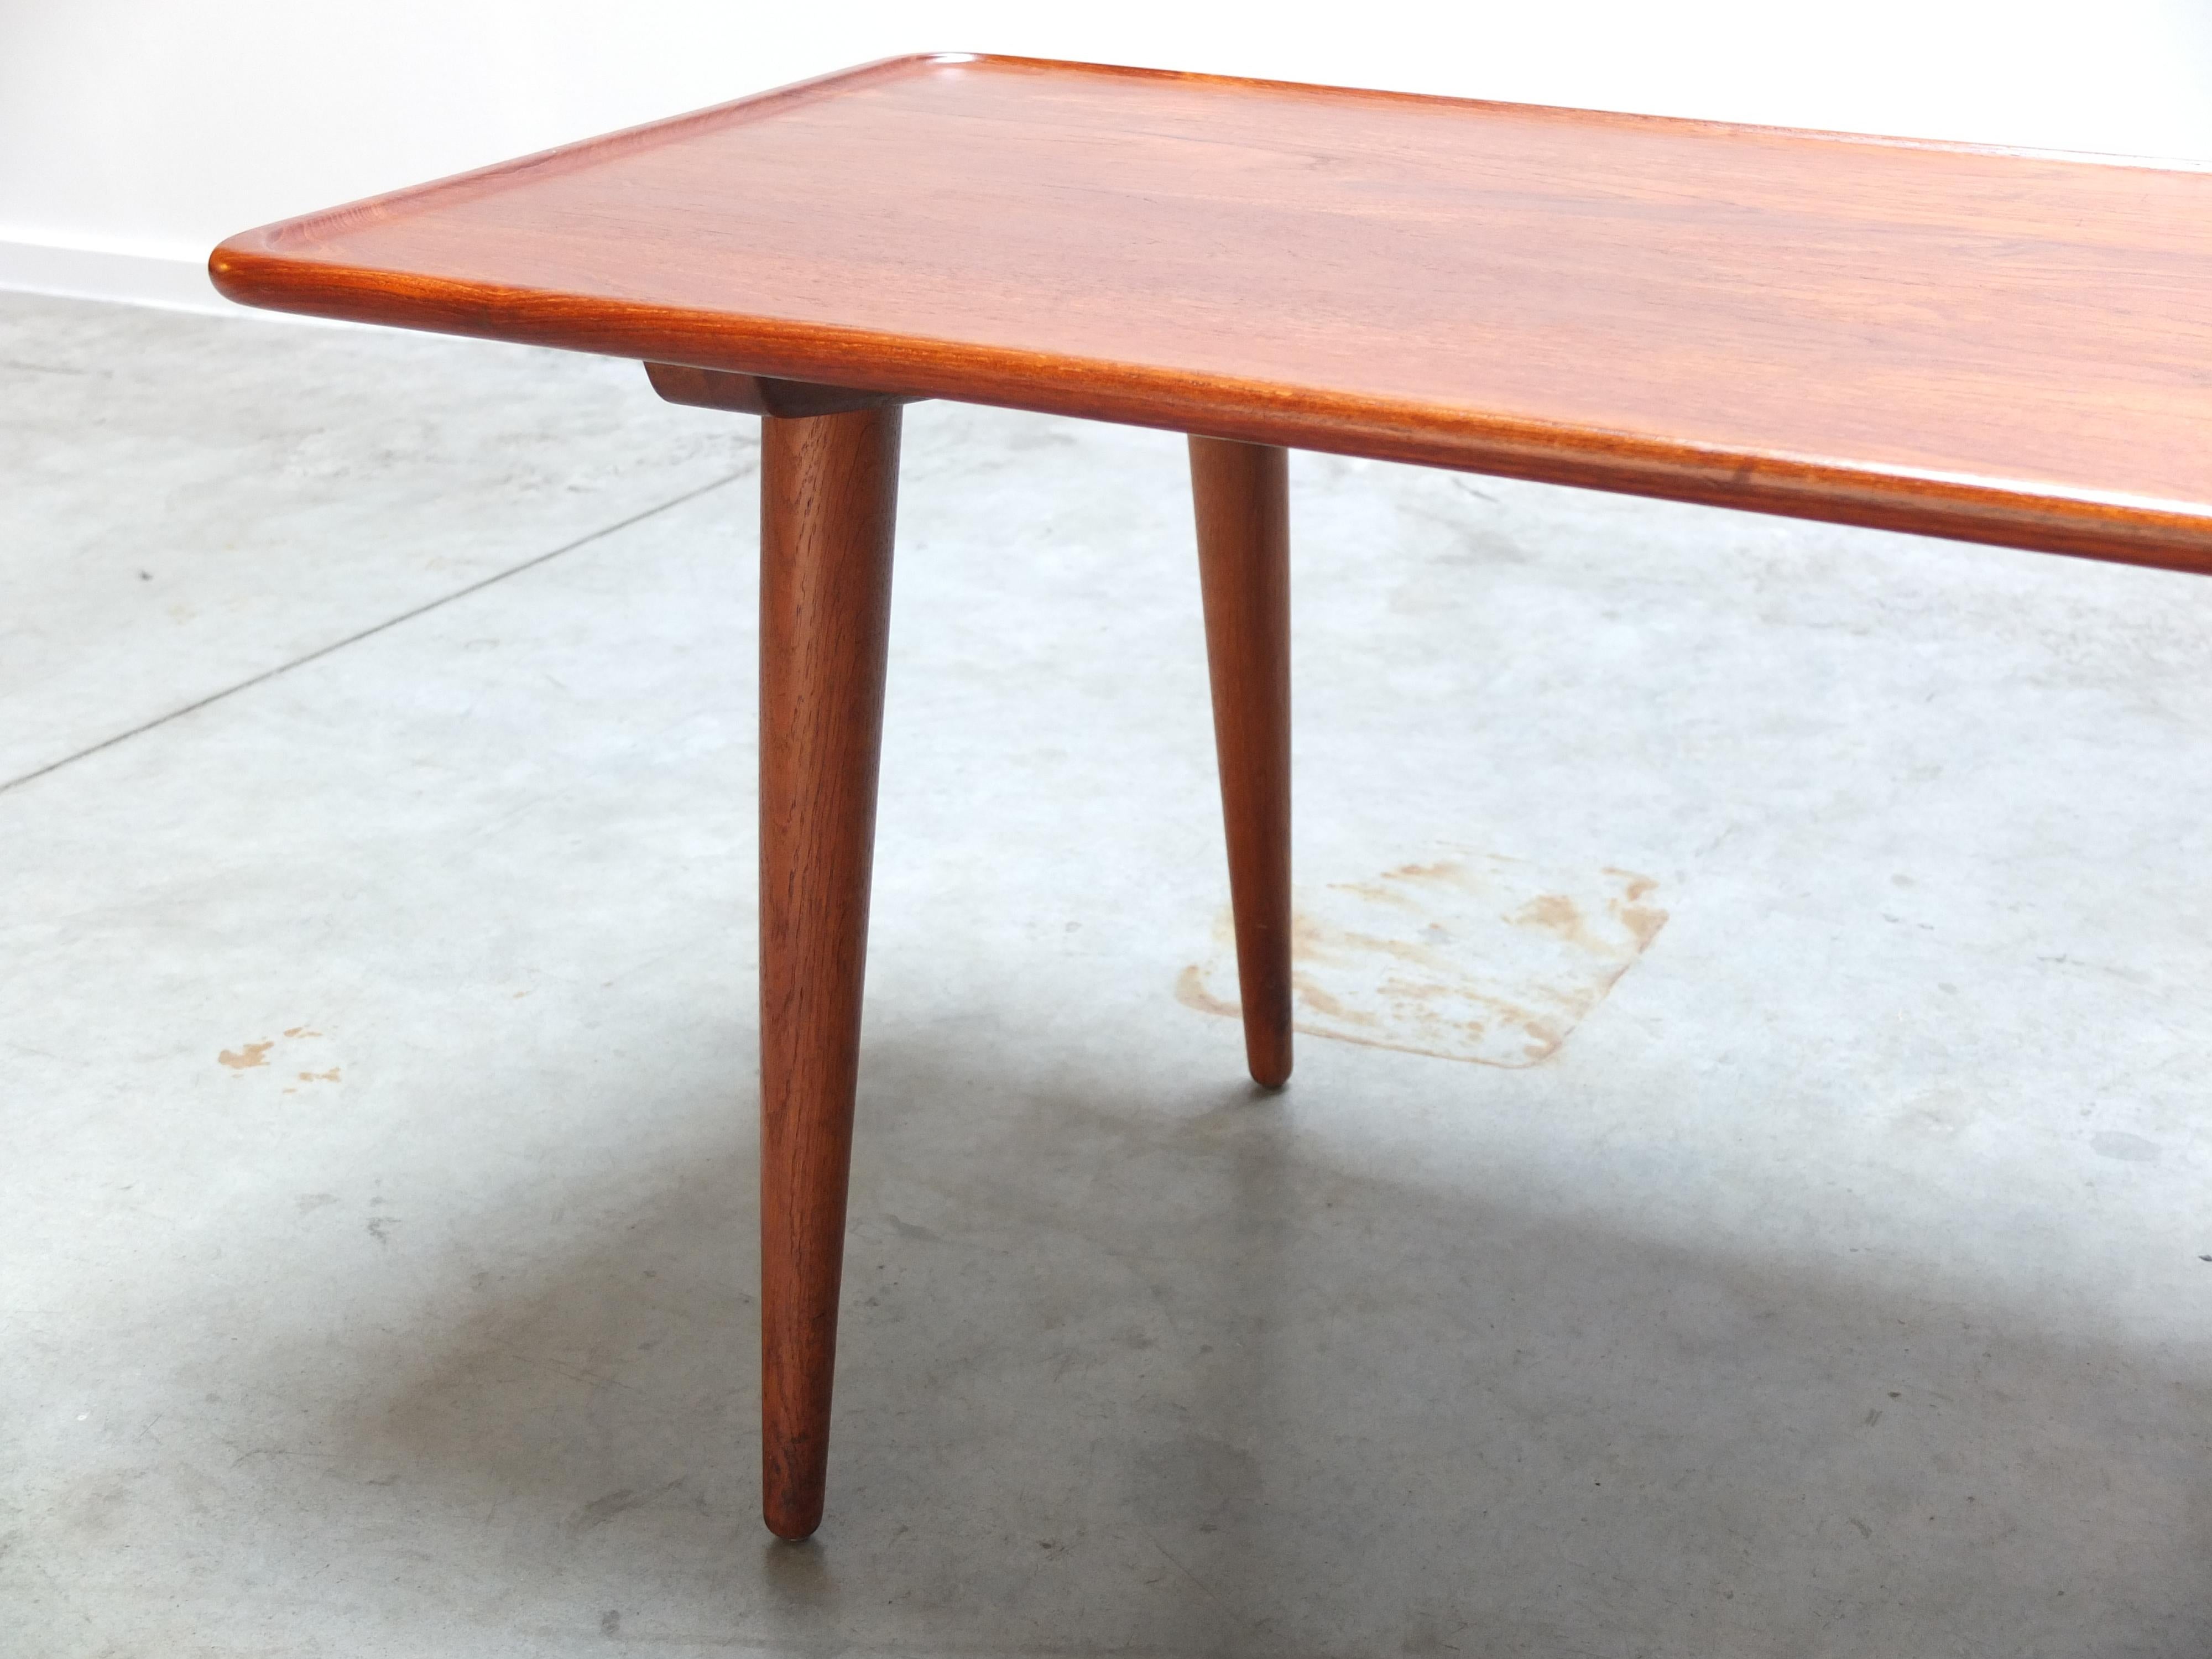 Teak & Oak 'At-11' Coffee Table by Hans Wegner for Andreas Tuck, 1950s For Sale 3